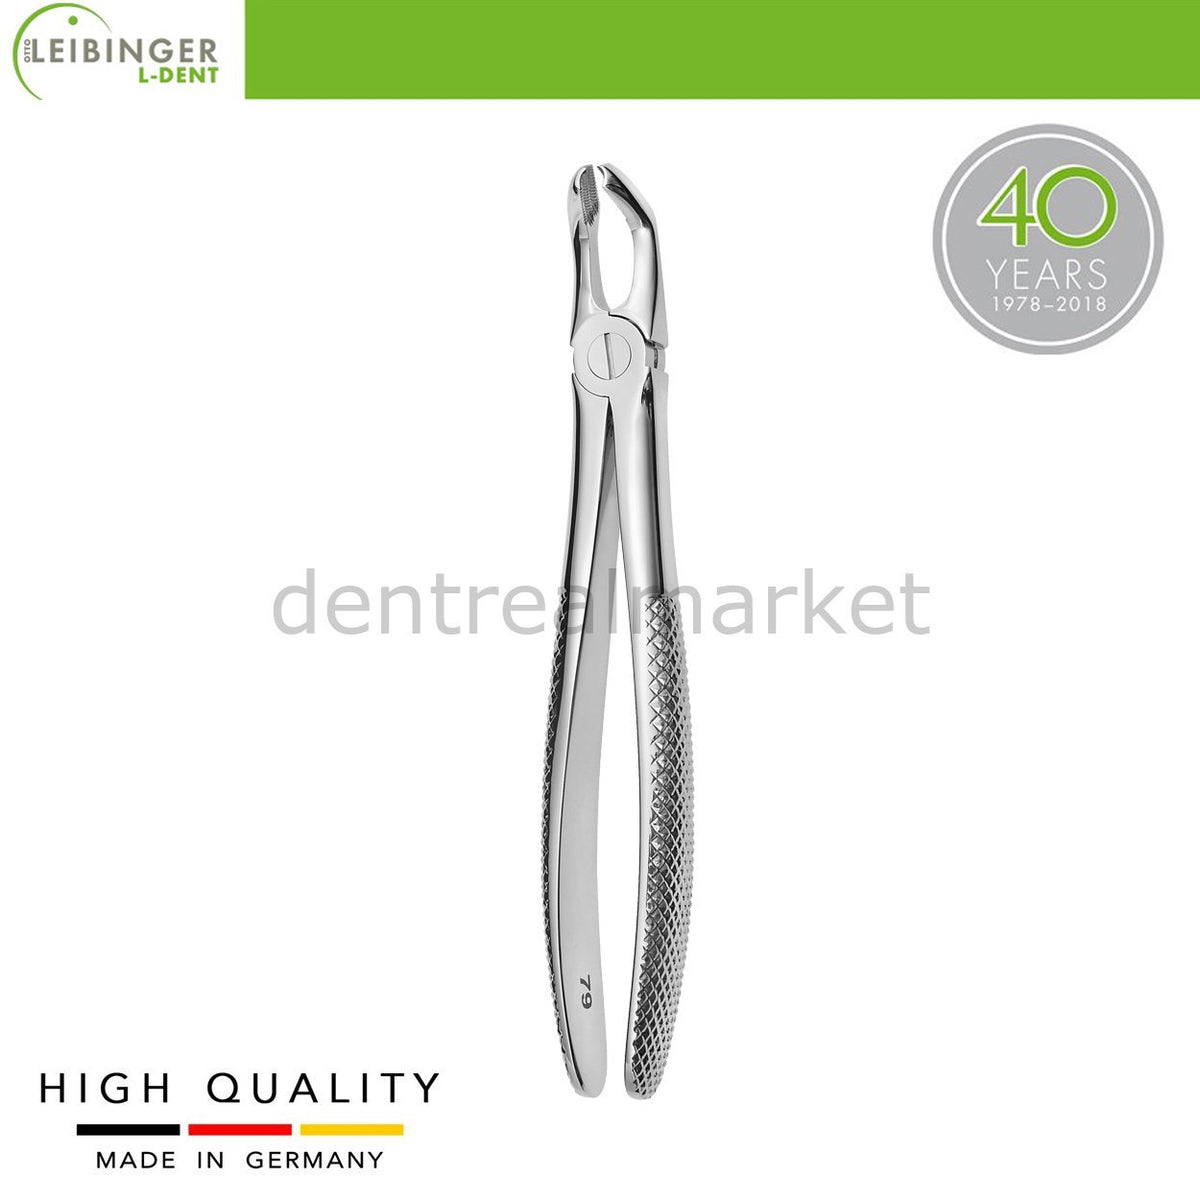 DentrealStore - Leibinger Adult Extracting Forceps79 - Forceps for Lower 20 Year Teeth